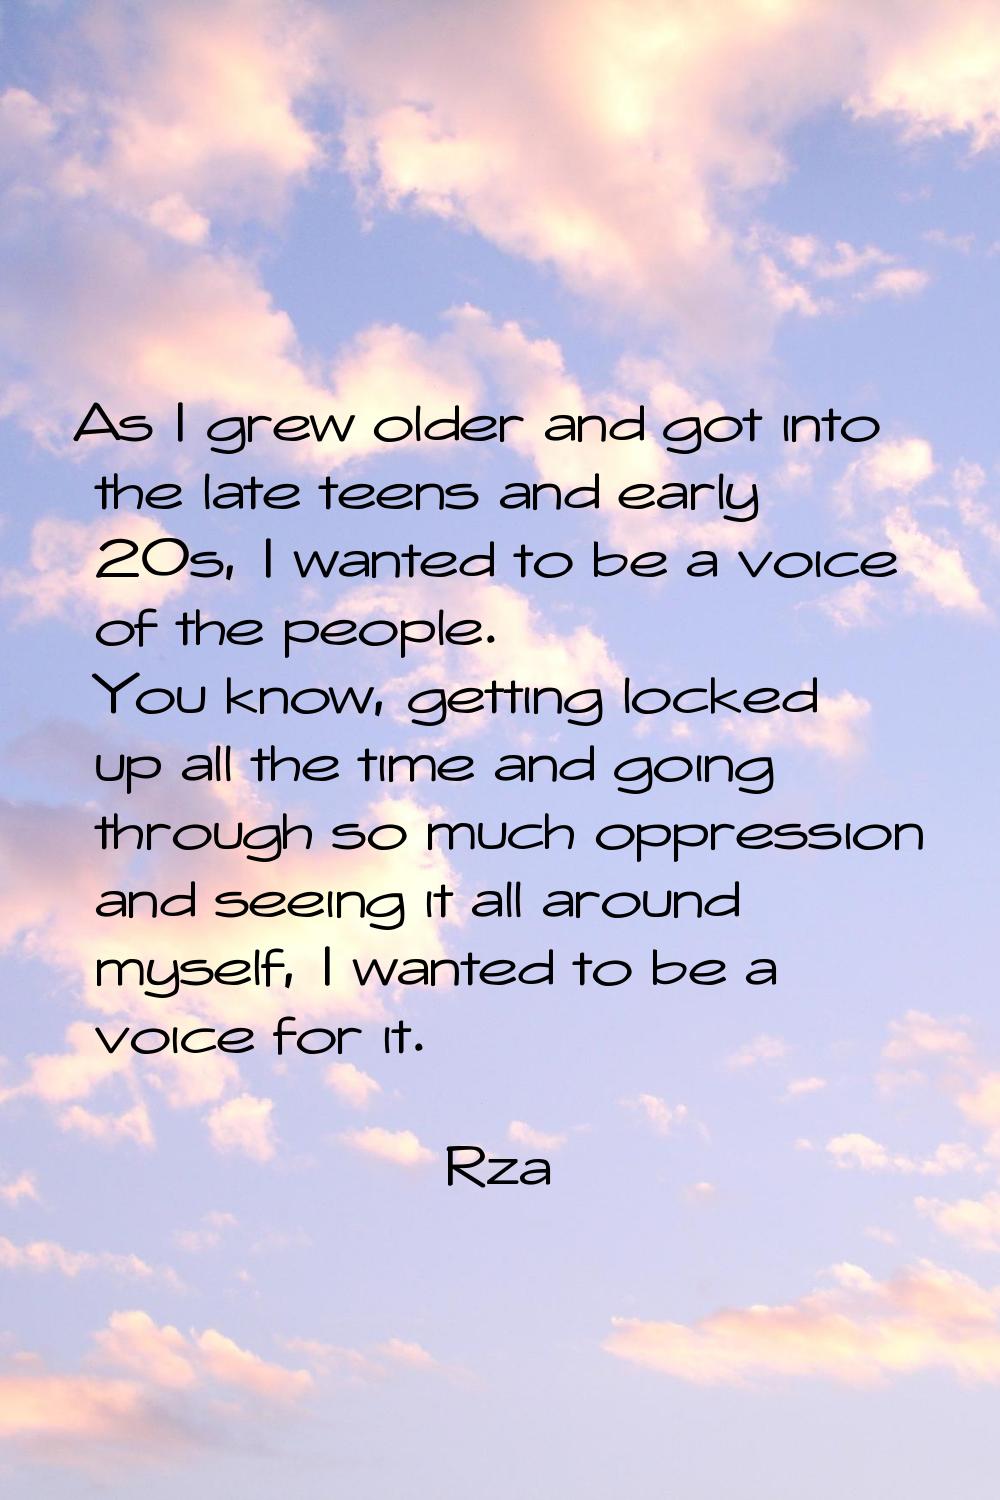 As I grew older and got into the late teens and early 20s, I wanted to be a voice of the people. Yo